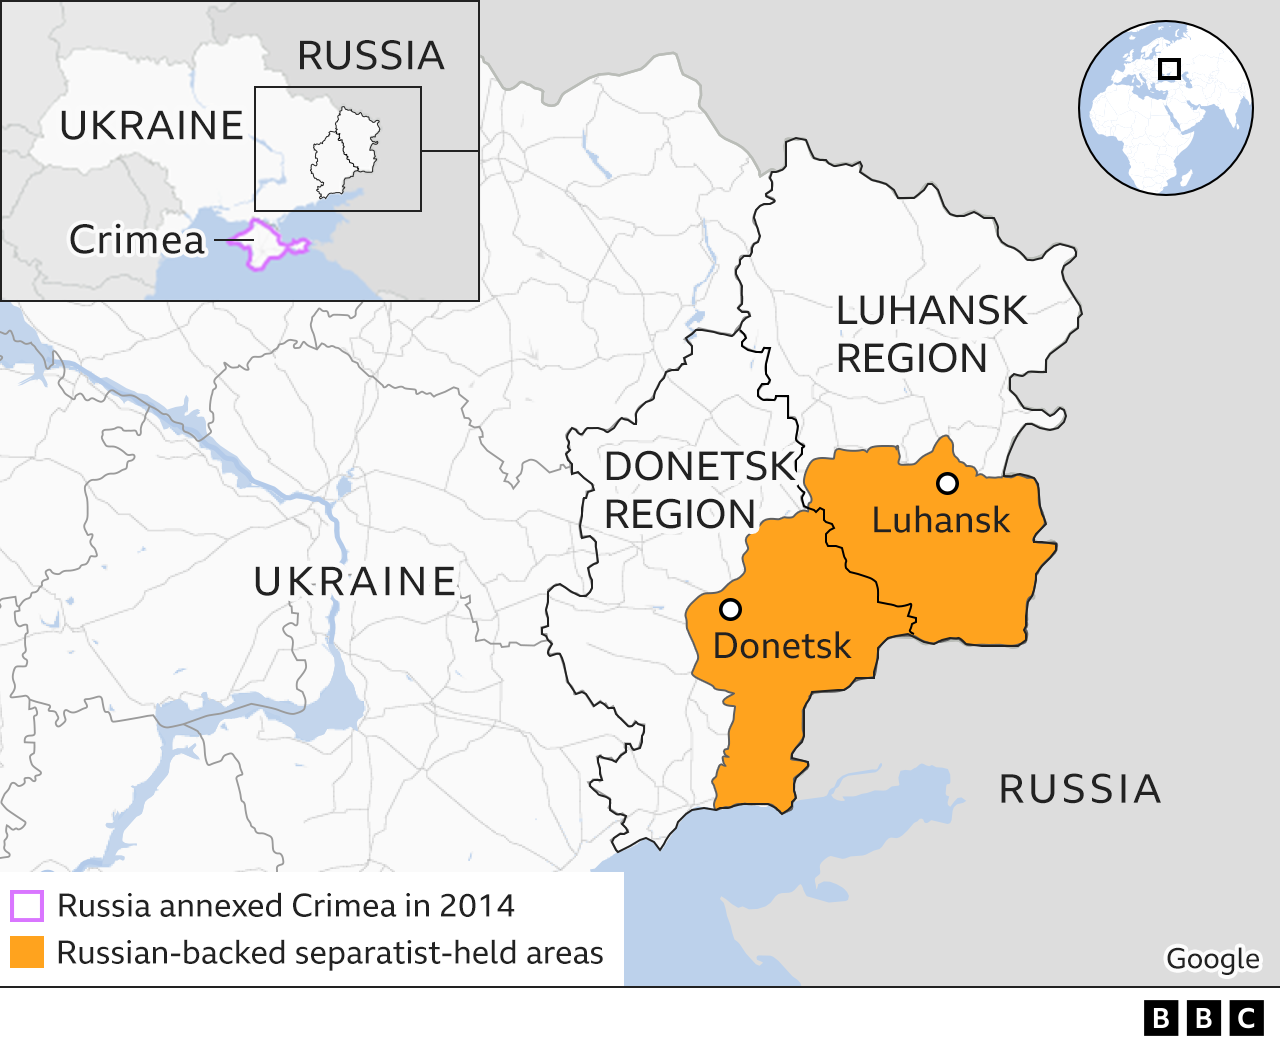 Map showing the regions of Donetsk and Luhansk in eastern Ukraine and the Russian-backed separatist-held areas within those regions.